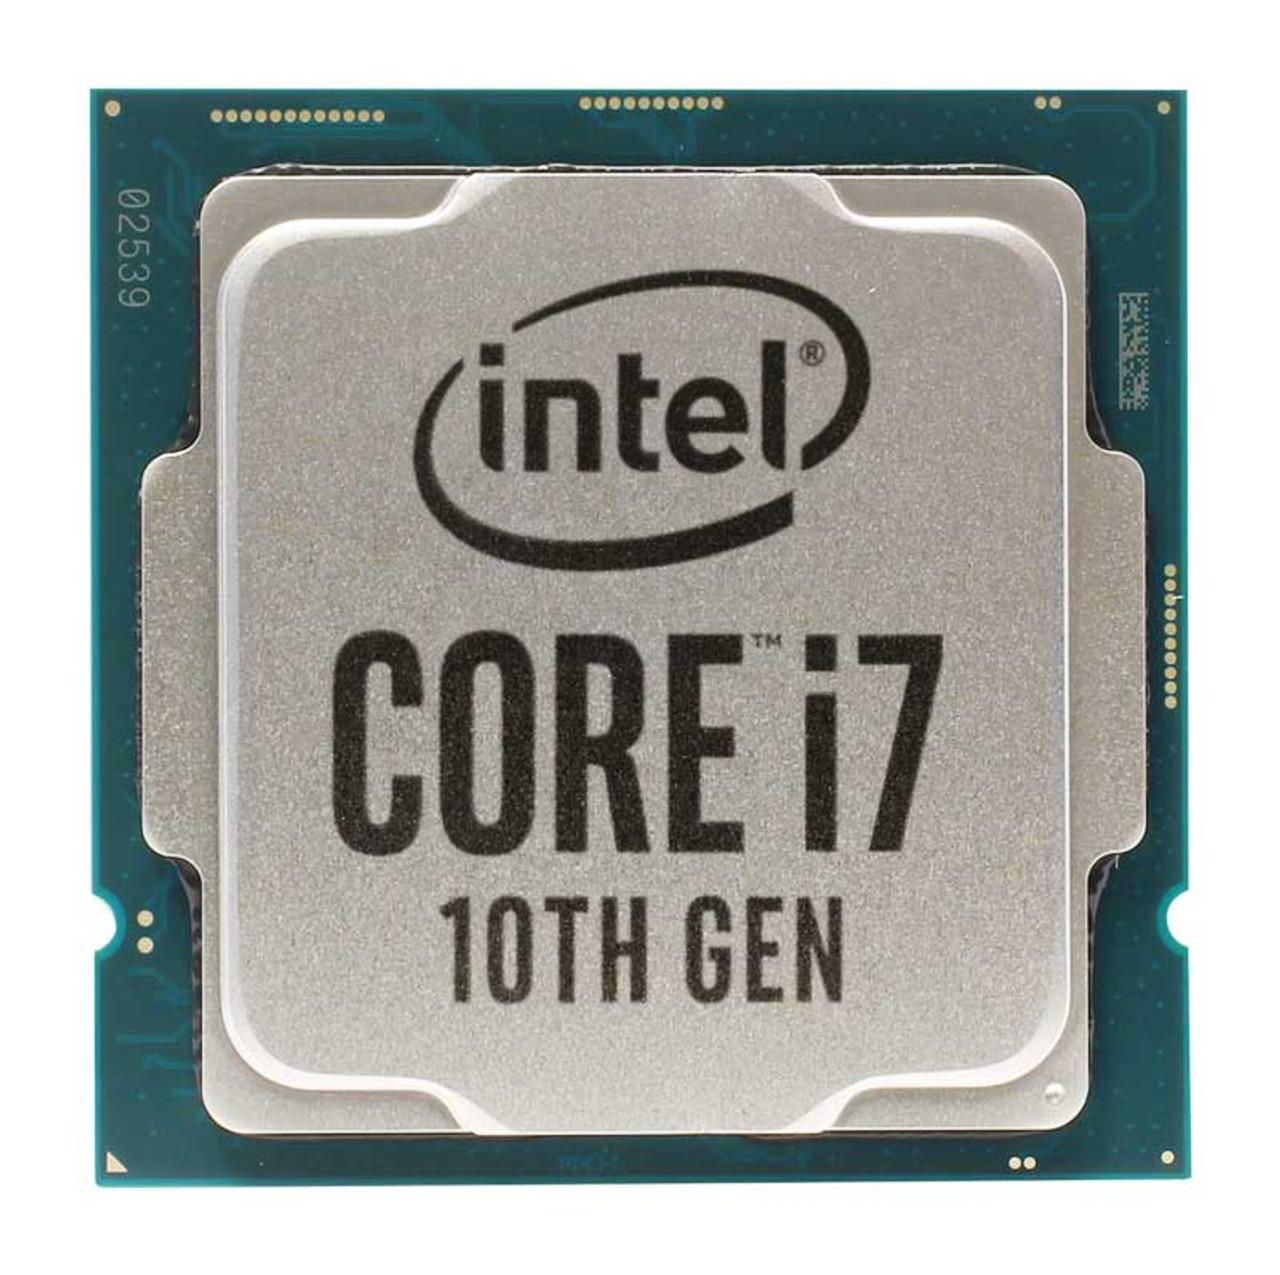 Процесор Intel Comet Lake-S Core I7-10700 8 cores, 2.9Ghz (Up to 4.80Ghz), 16MB, 65W, LGA1200, TRAY